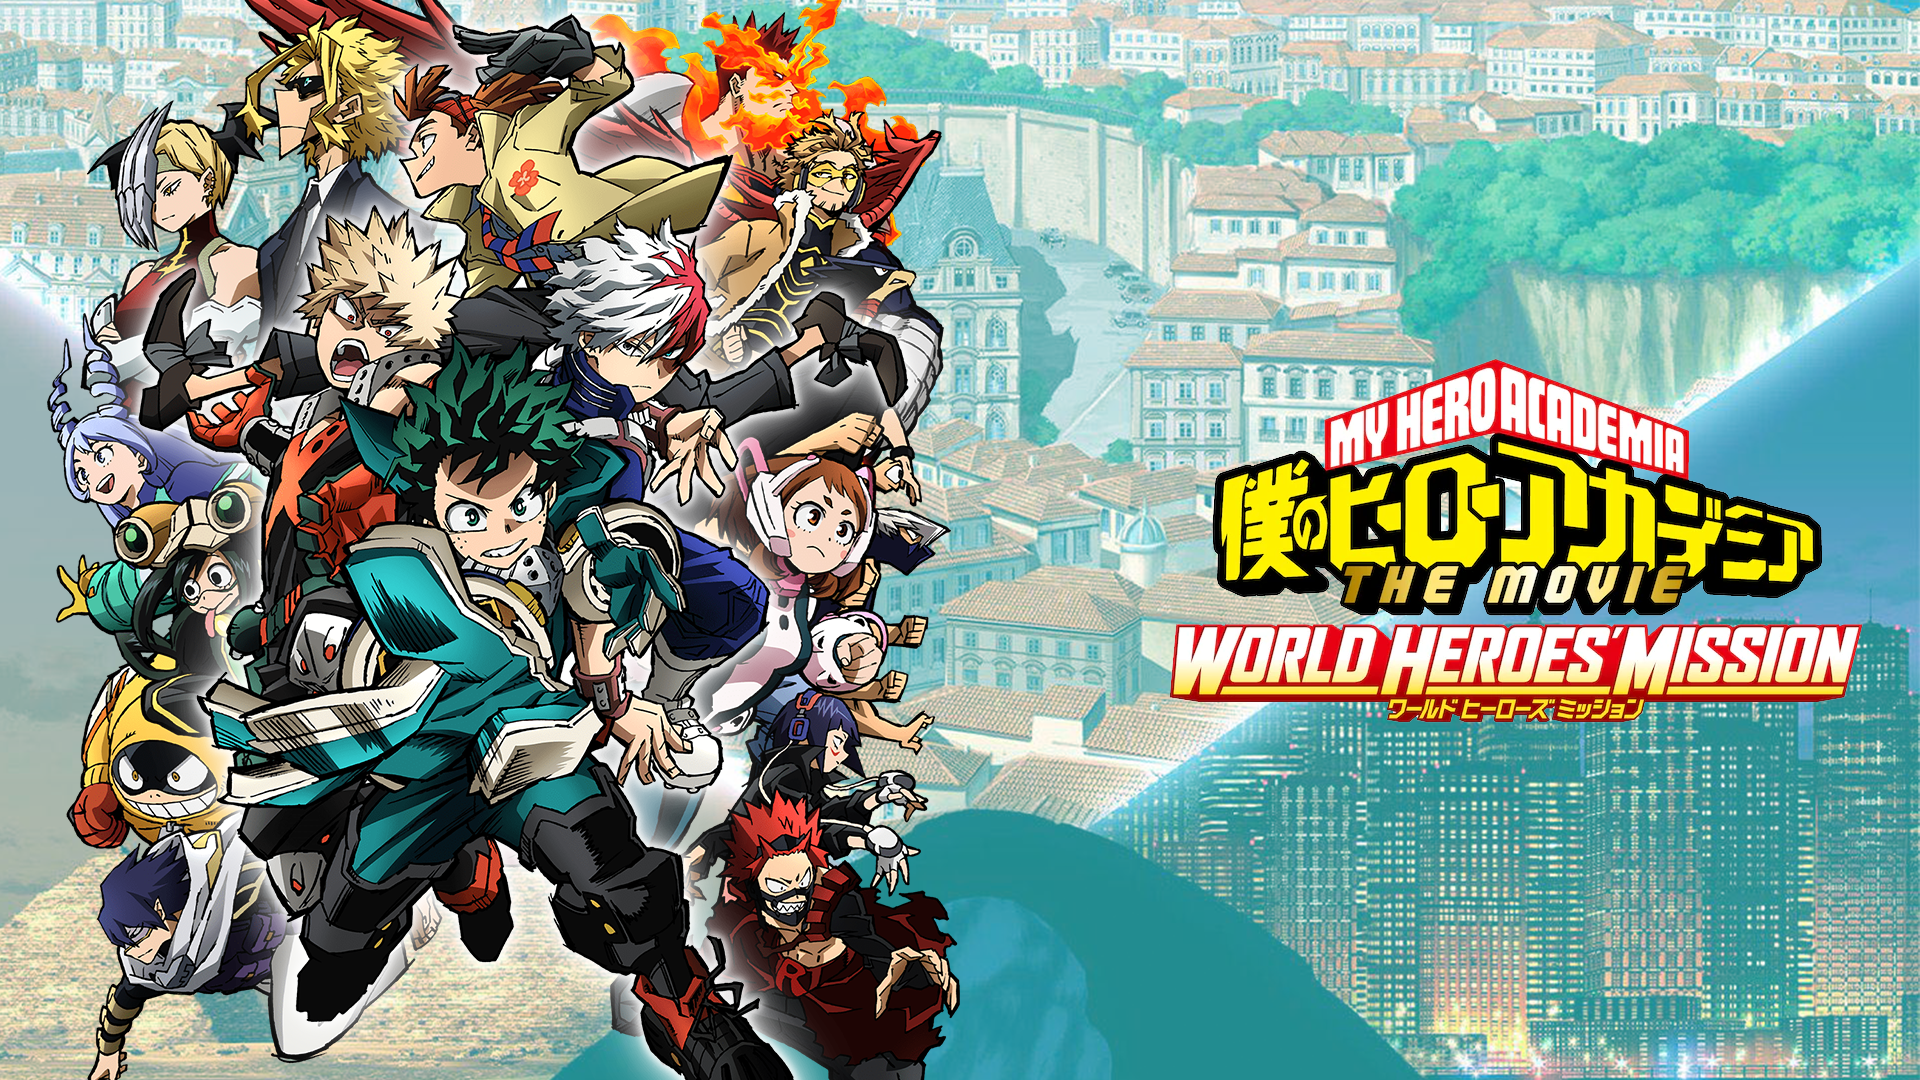 I made some wallpaper from the World Heroes Mission poster.: BokuNoHeroAcademia